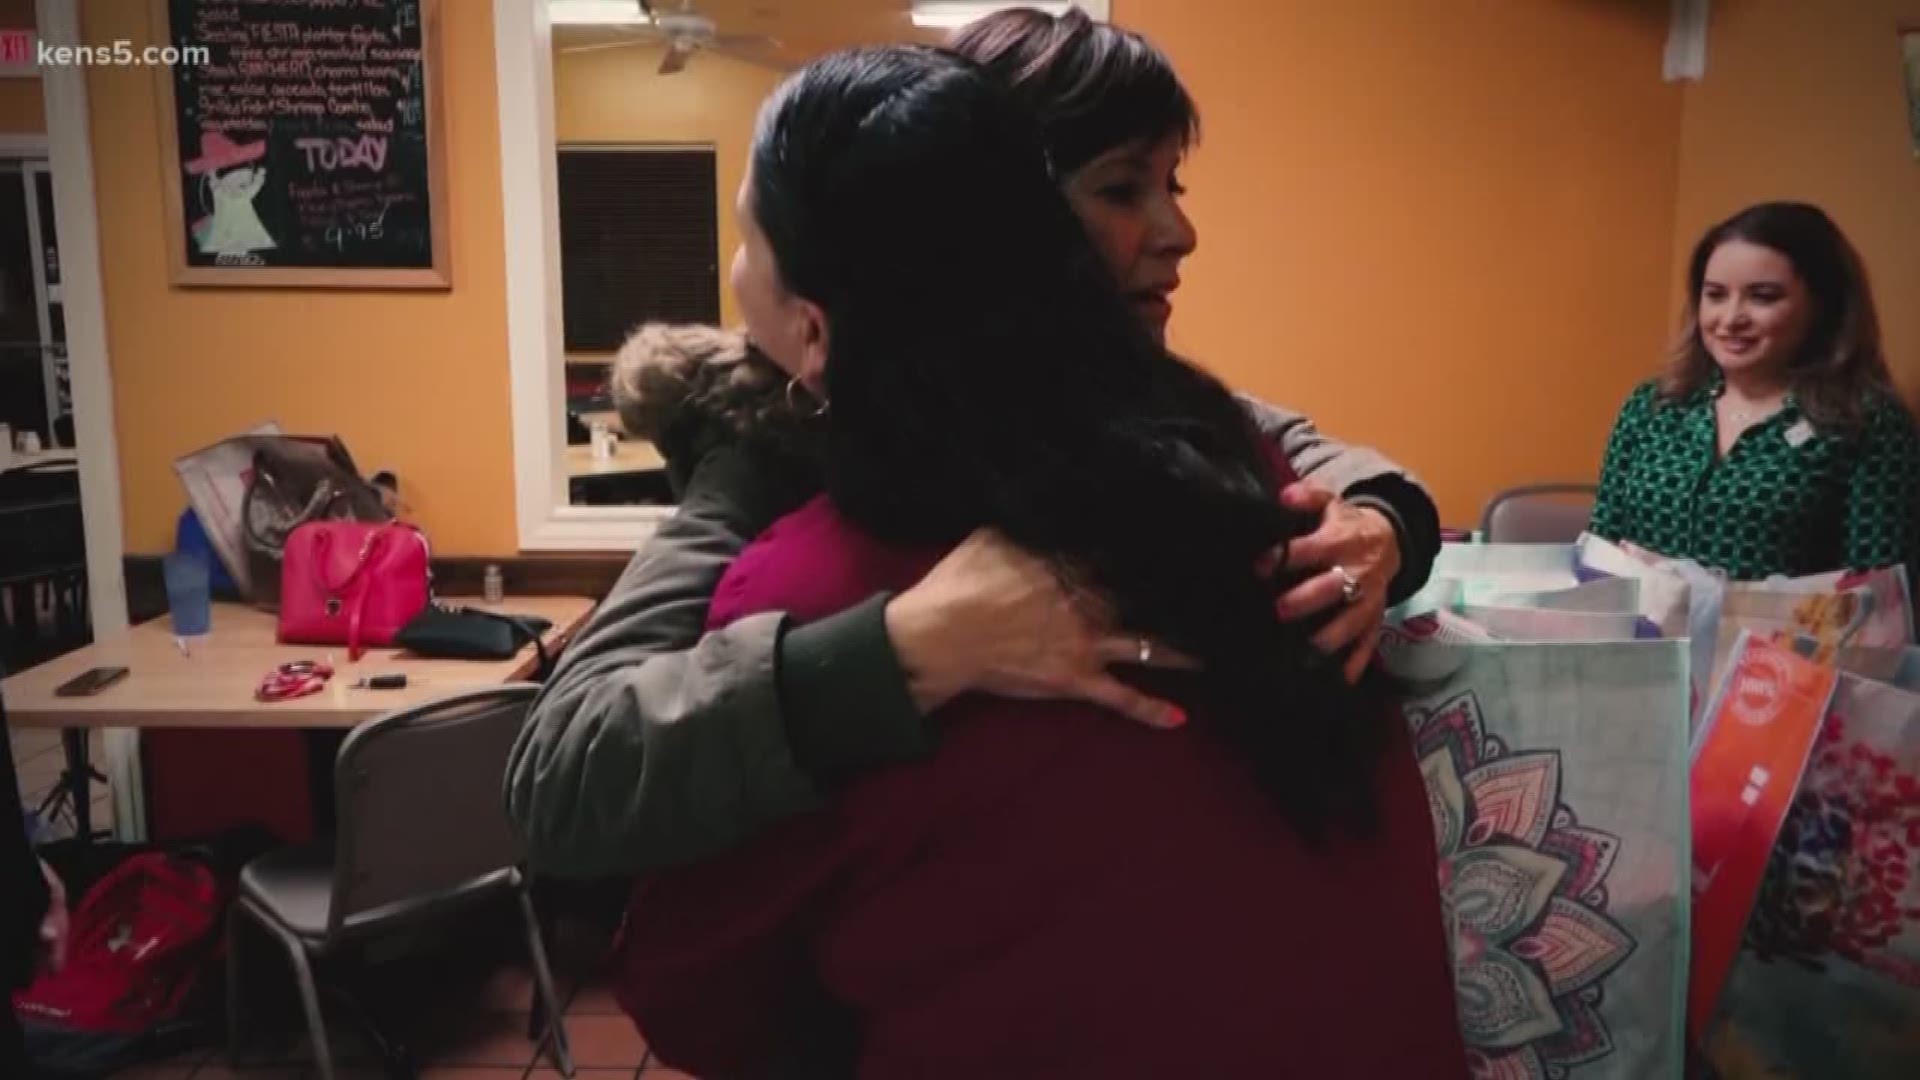 As federal workers looked to the community for help during the shutdown, their spouses began to look out for one another.